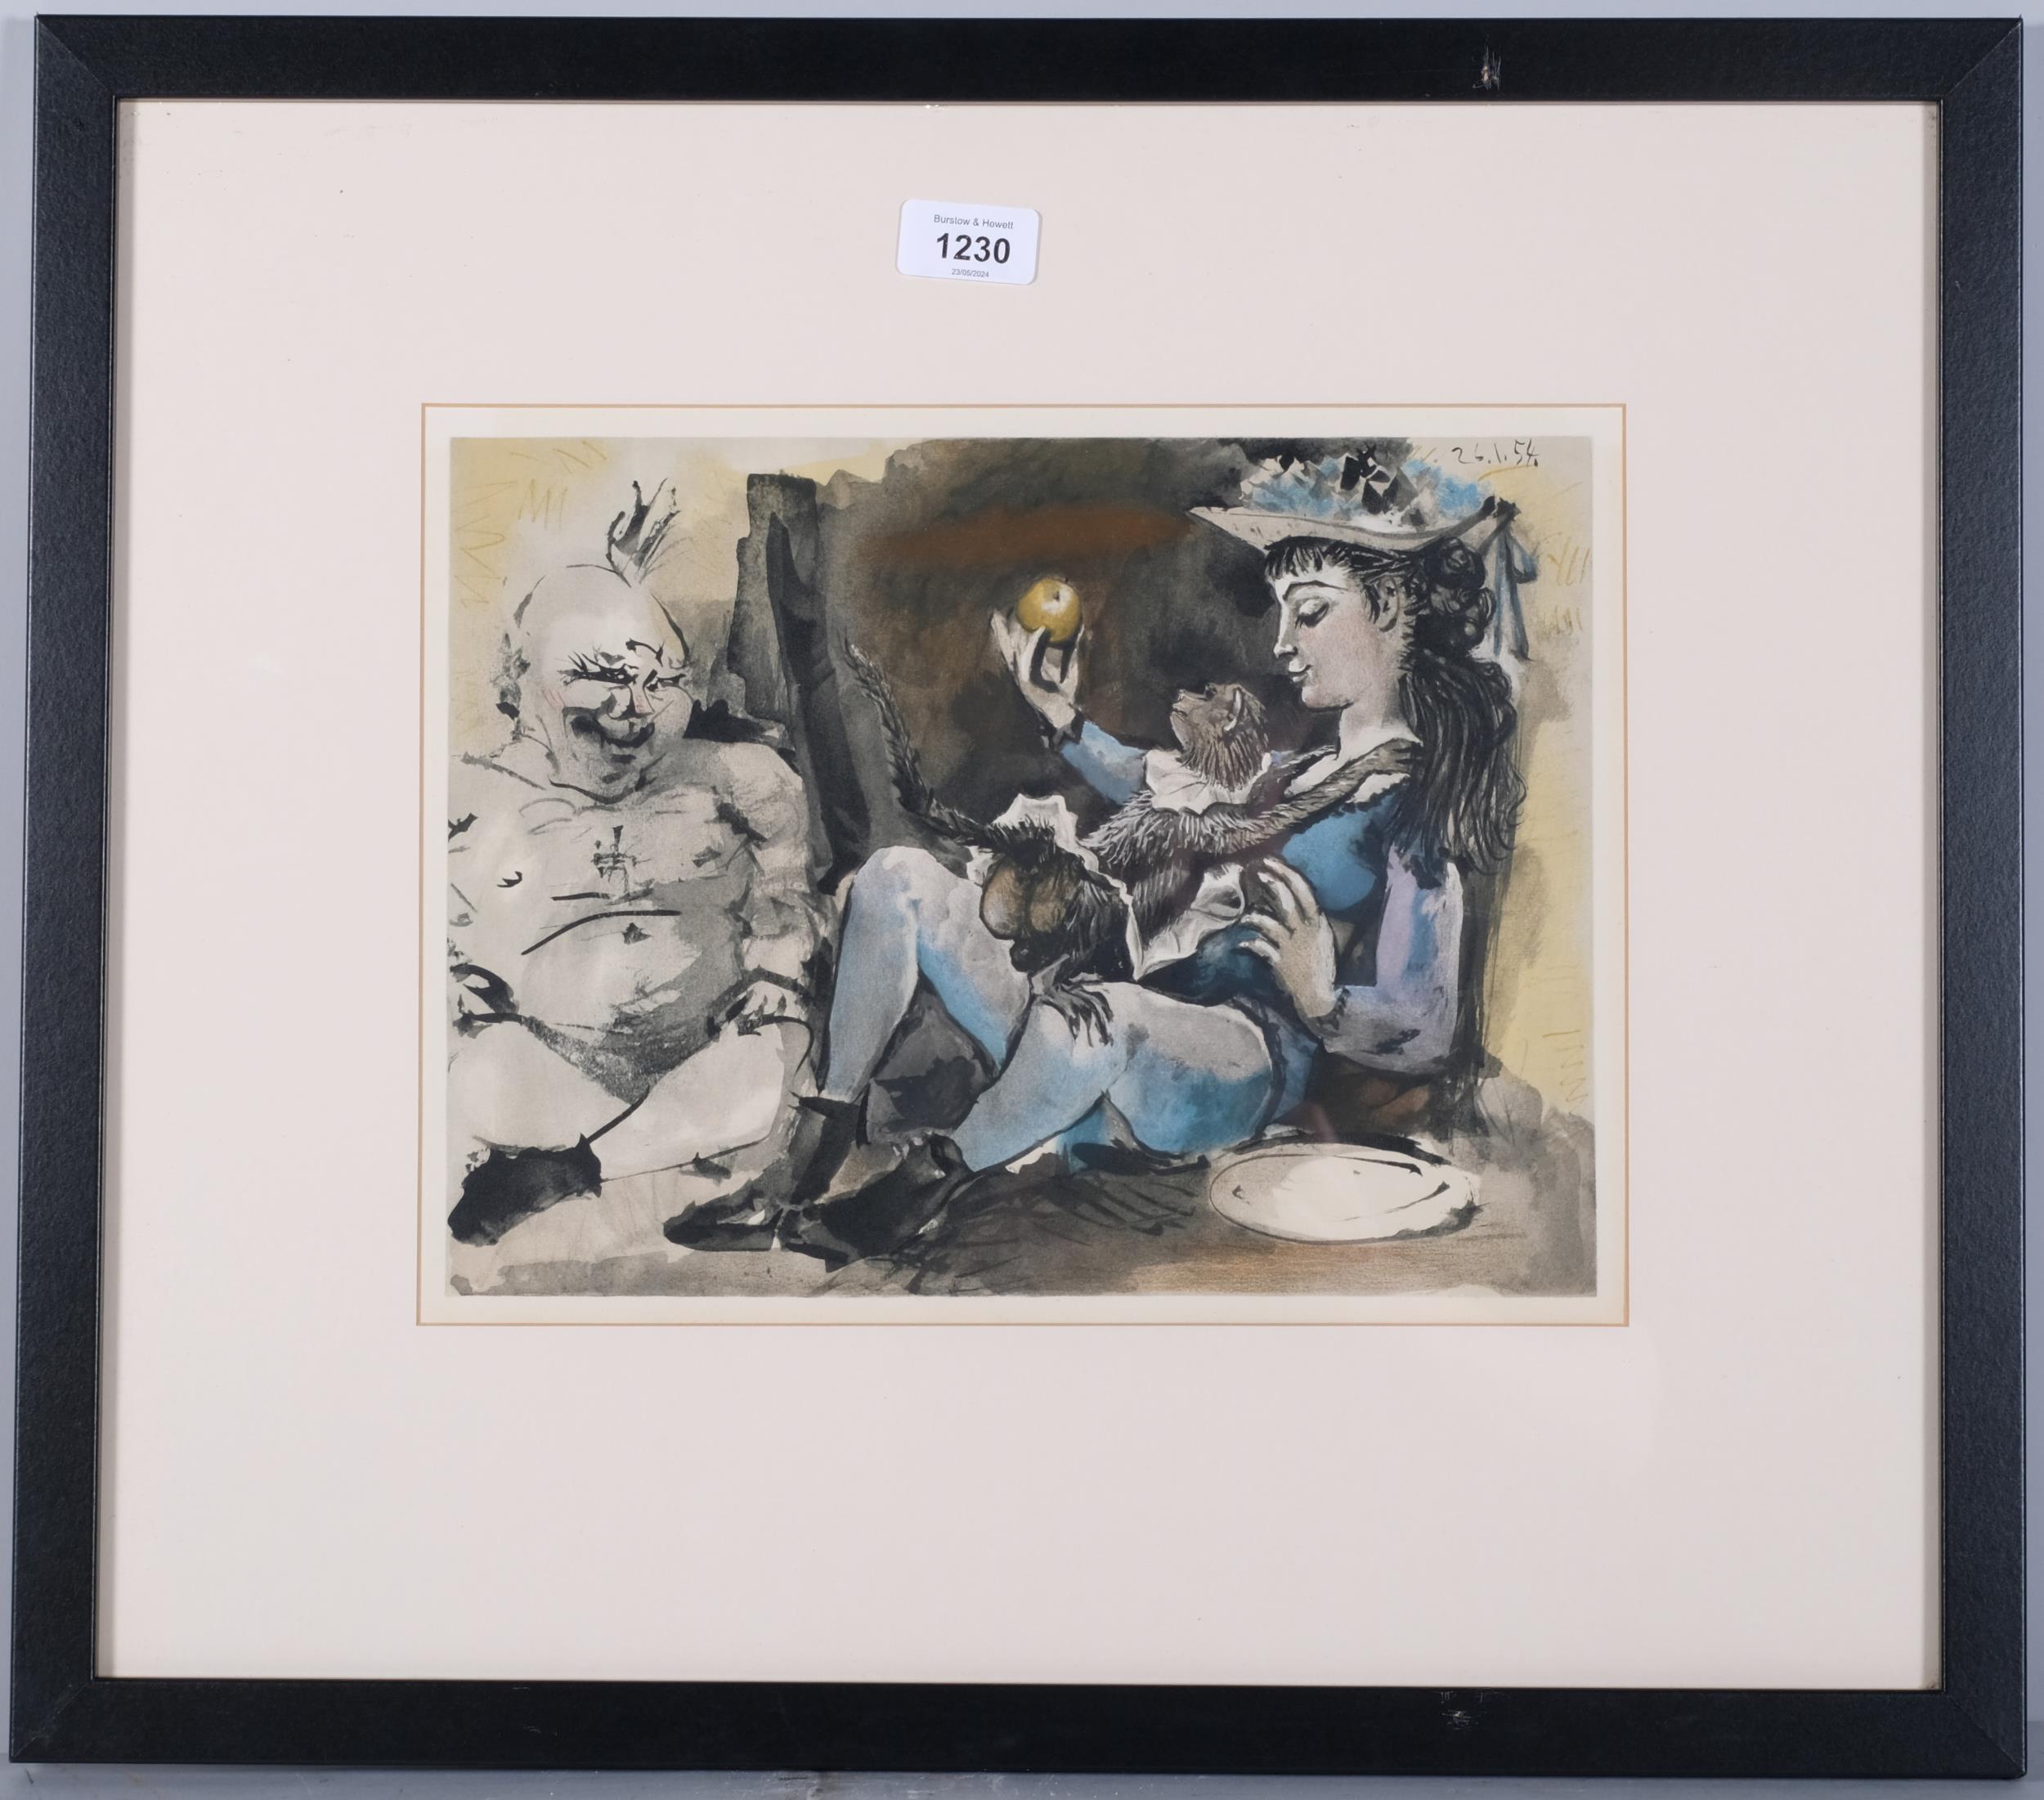 Pablo Picasso, woman with monkey and clown, original lithograph, published 1954, image 23.5cm x - Image 2 of 4